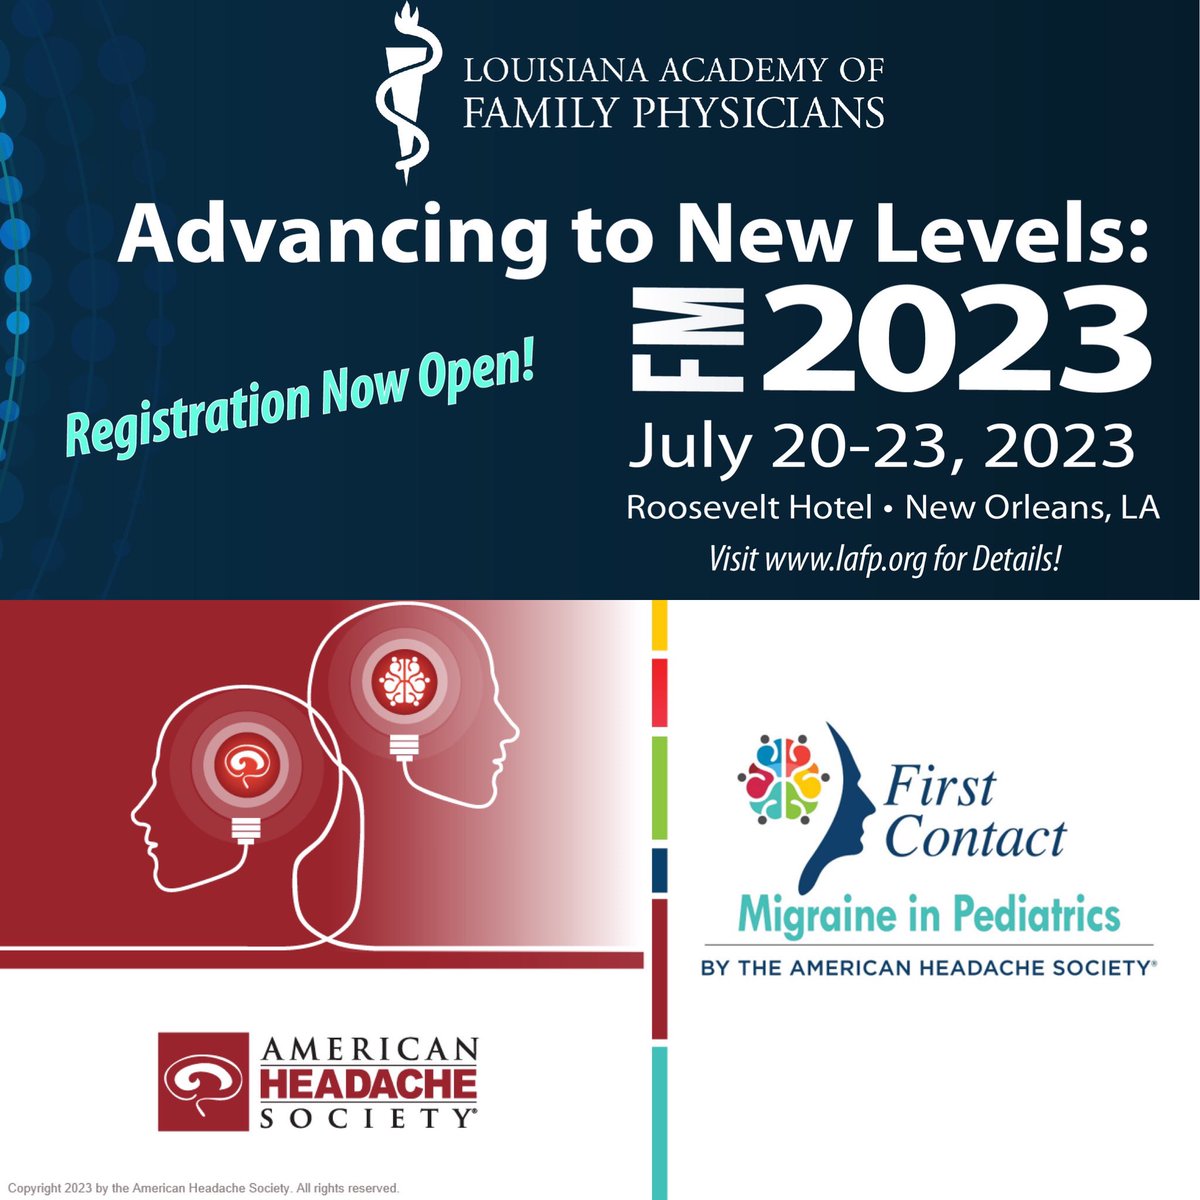 A tremendous thank you to the @lafp_familydocs for inviting @ahsheadache to present “First Contact - Migraine in Pediatrics” at your Annual Assembly today! Launching this pediatric focused component of the First Contact primary care migraine education program is so exciting!